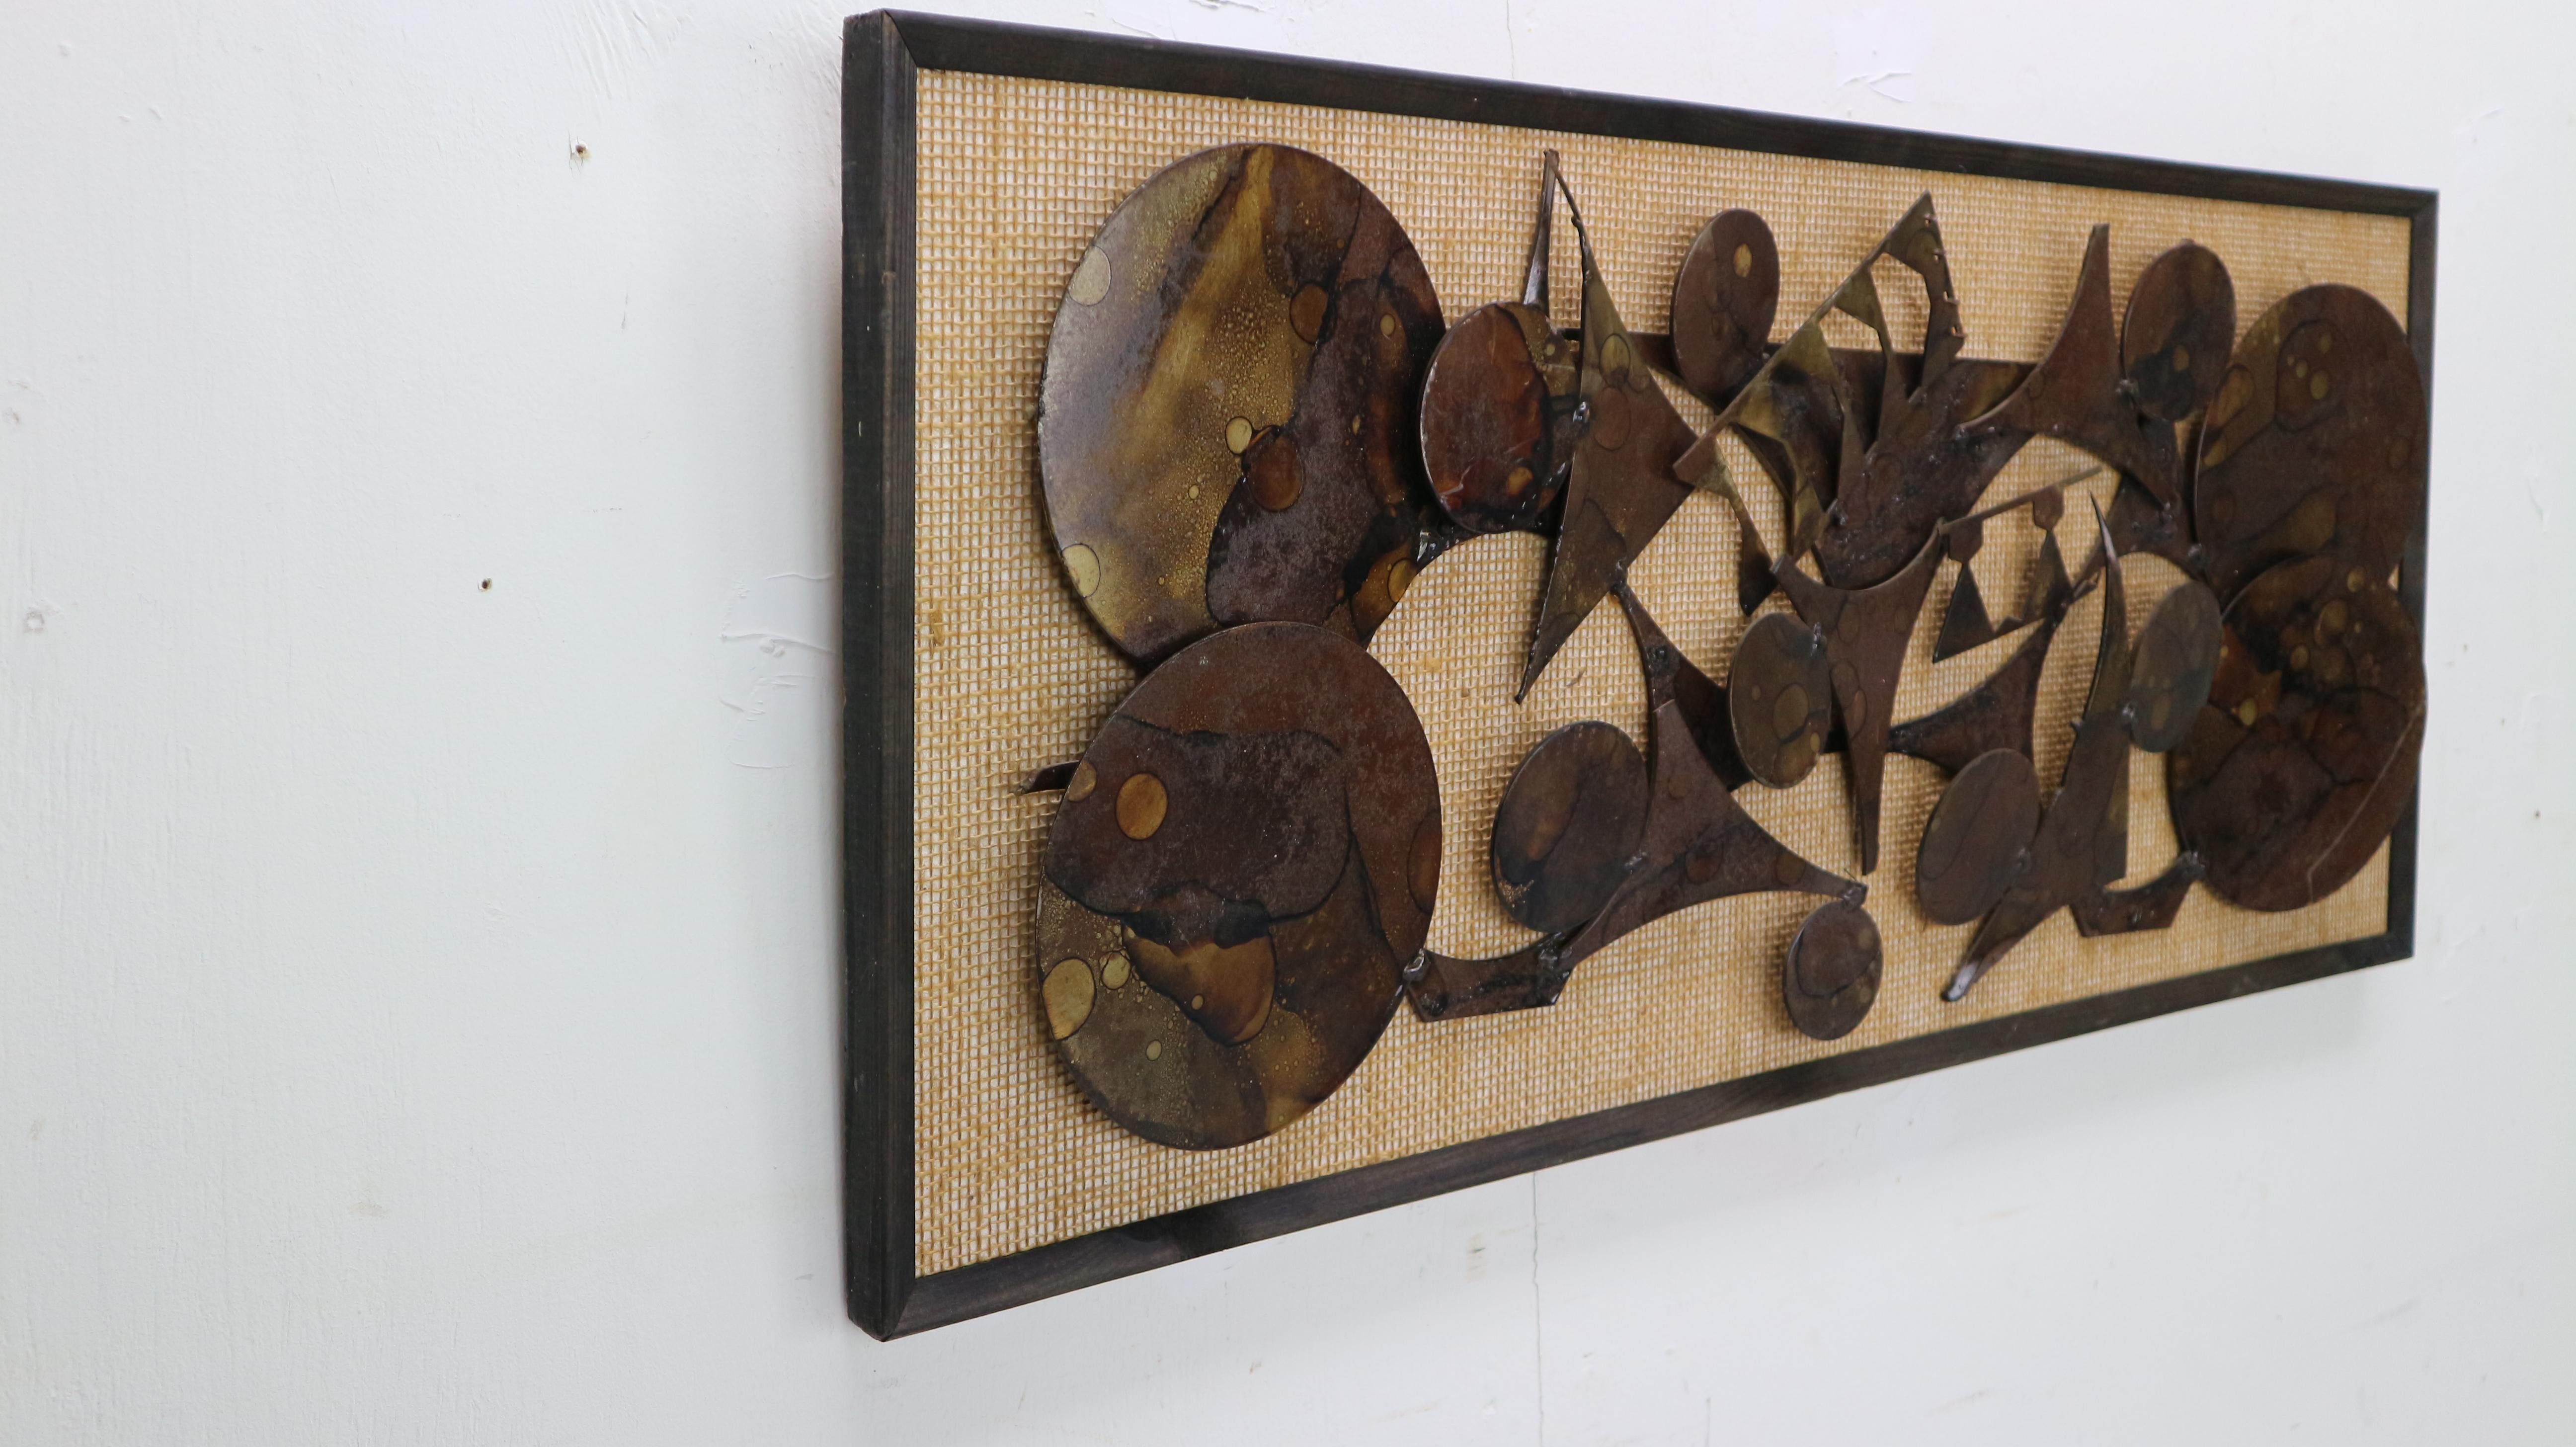 This brutalist wall sculpture was designed and manufactured by the Danish artist Henrik Horst, circa 1970s.

Bronze sculpture on a wooden panel with burlap. Framed.

Hendrik Horst is an artist and designer born in 1942 in Denmark. Study tours in